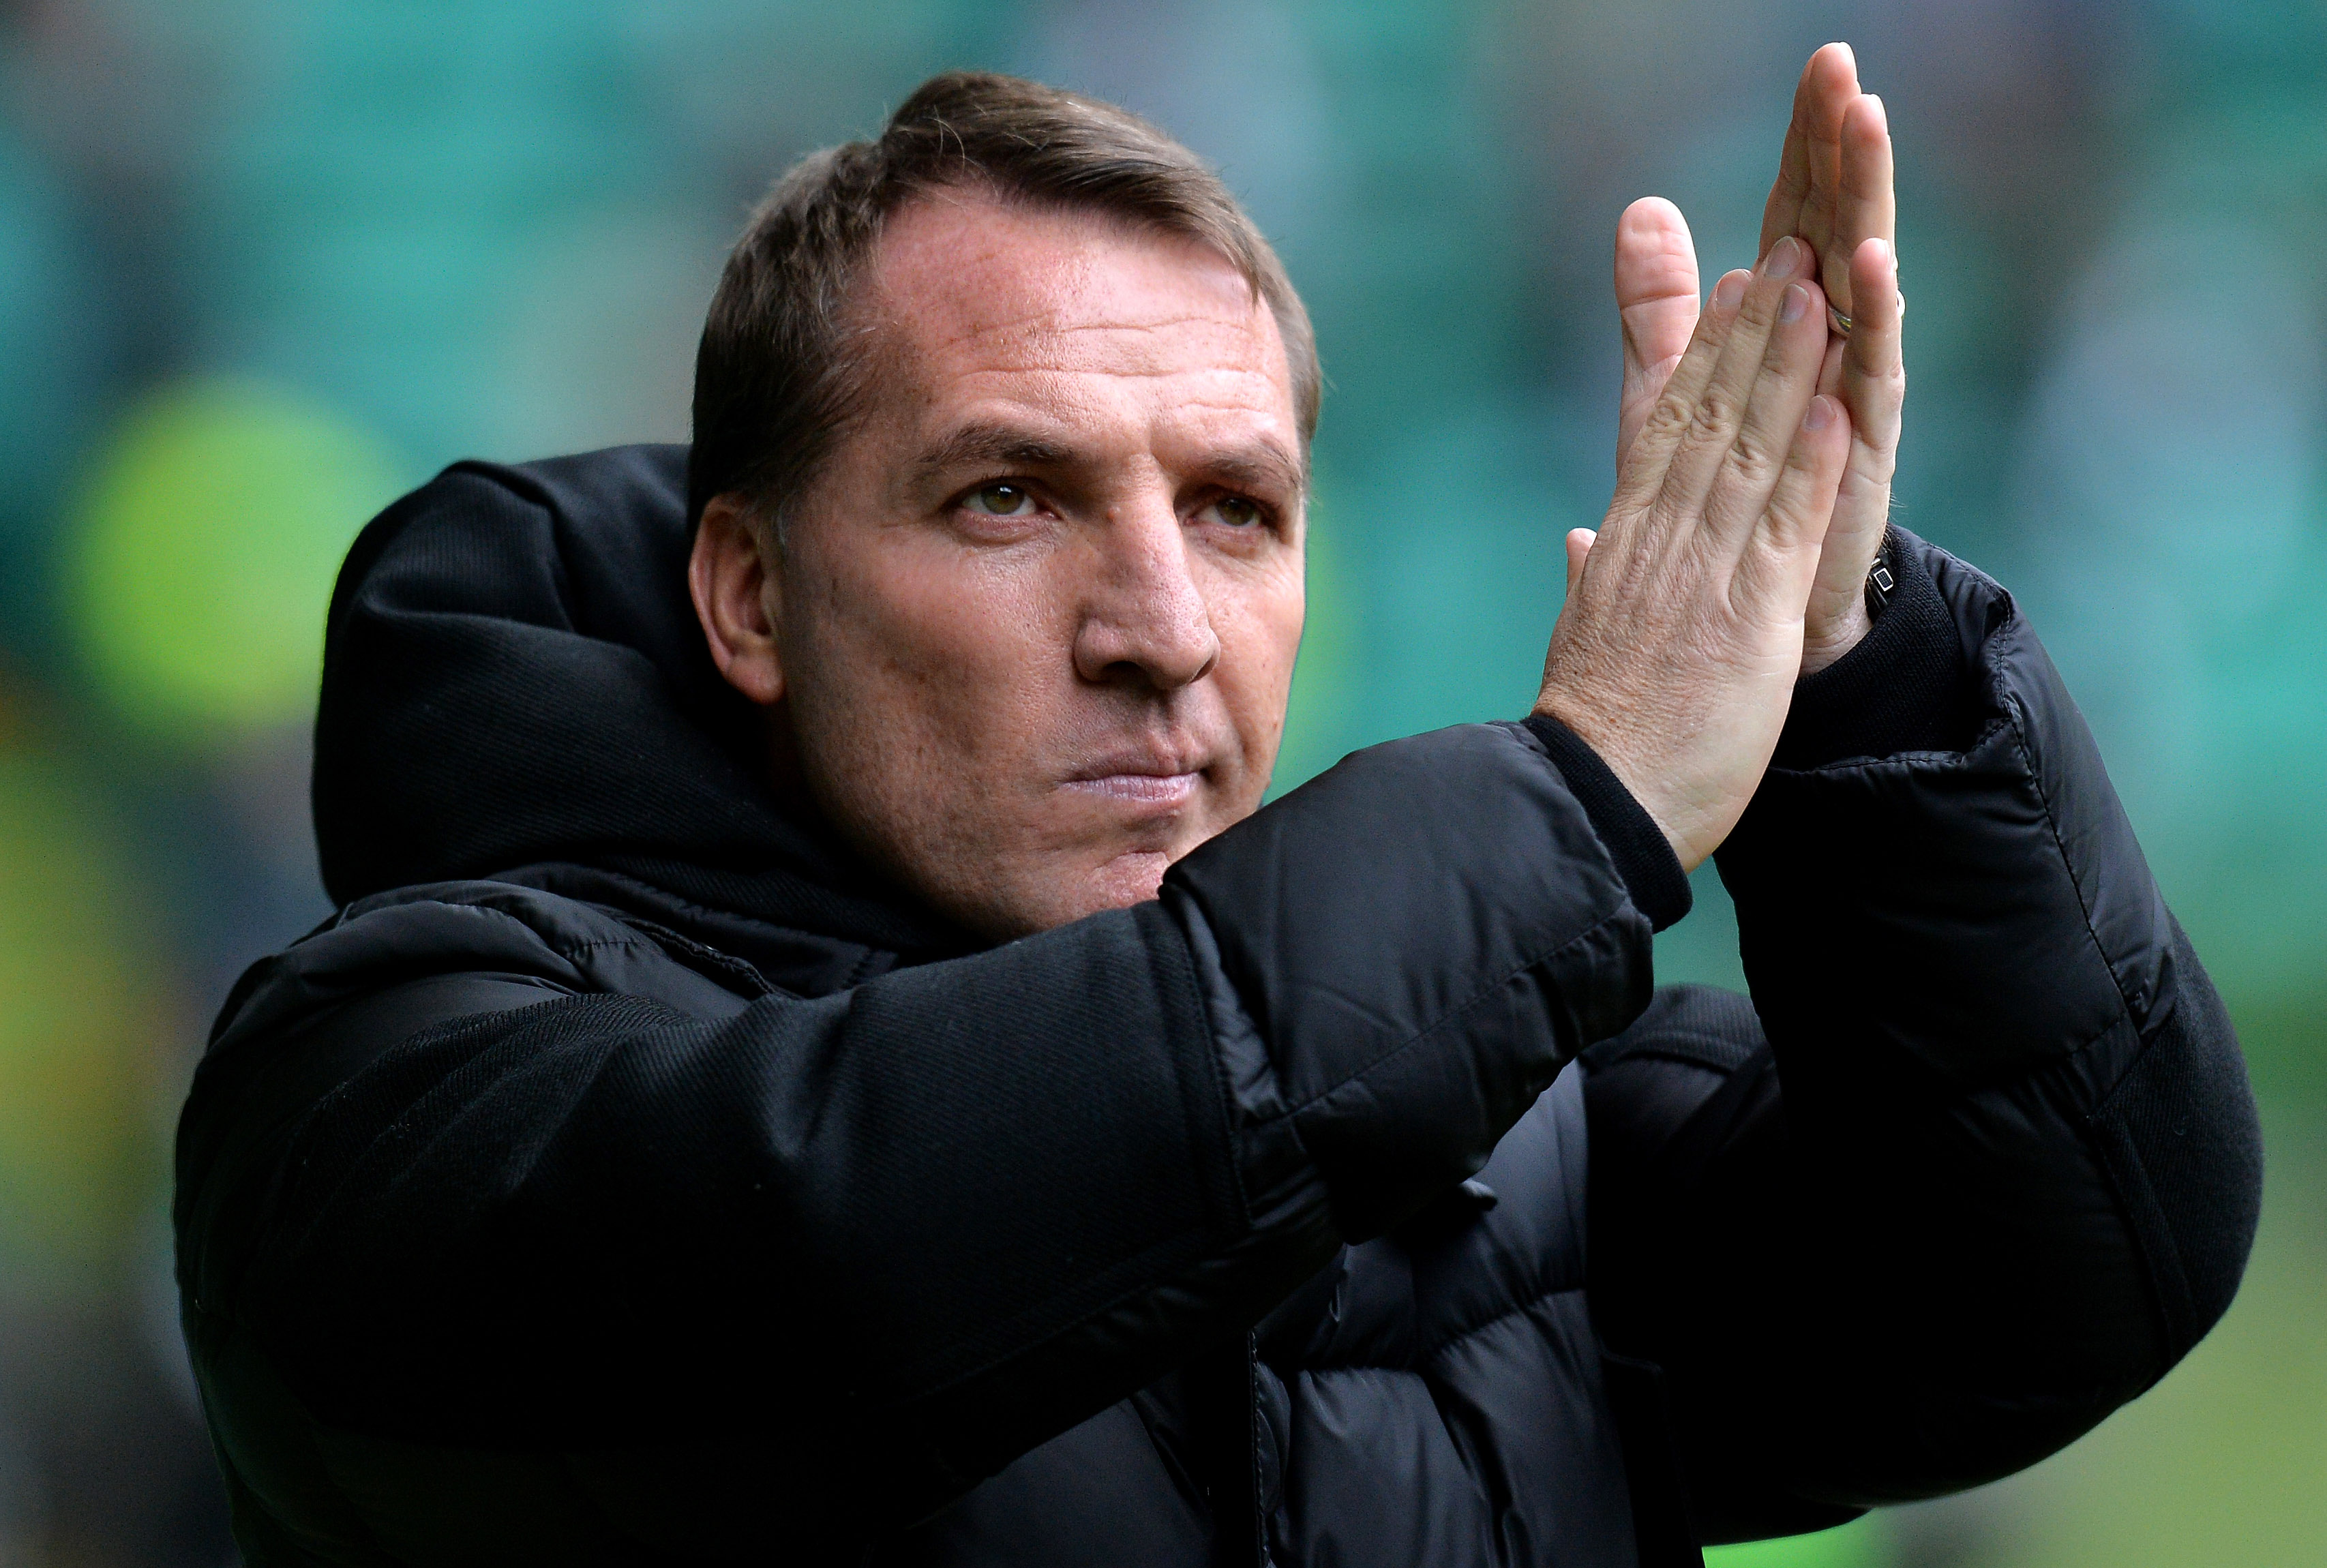 GLASGOW, SCOTLAND - MARCH 03: Celtic manager Brendan Rodgers during the Scottish Cup Quarter Final match between Celtic and Greenock Morton at Celtic Park on March 3, 2018 in Glasgow, Scotland. (Photo by Mark Runnacles/Getty Images)